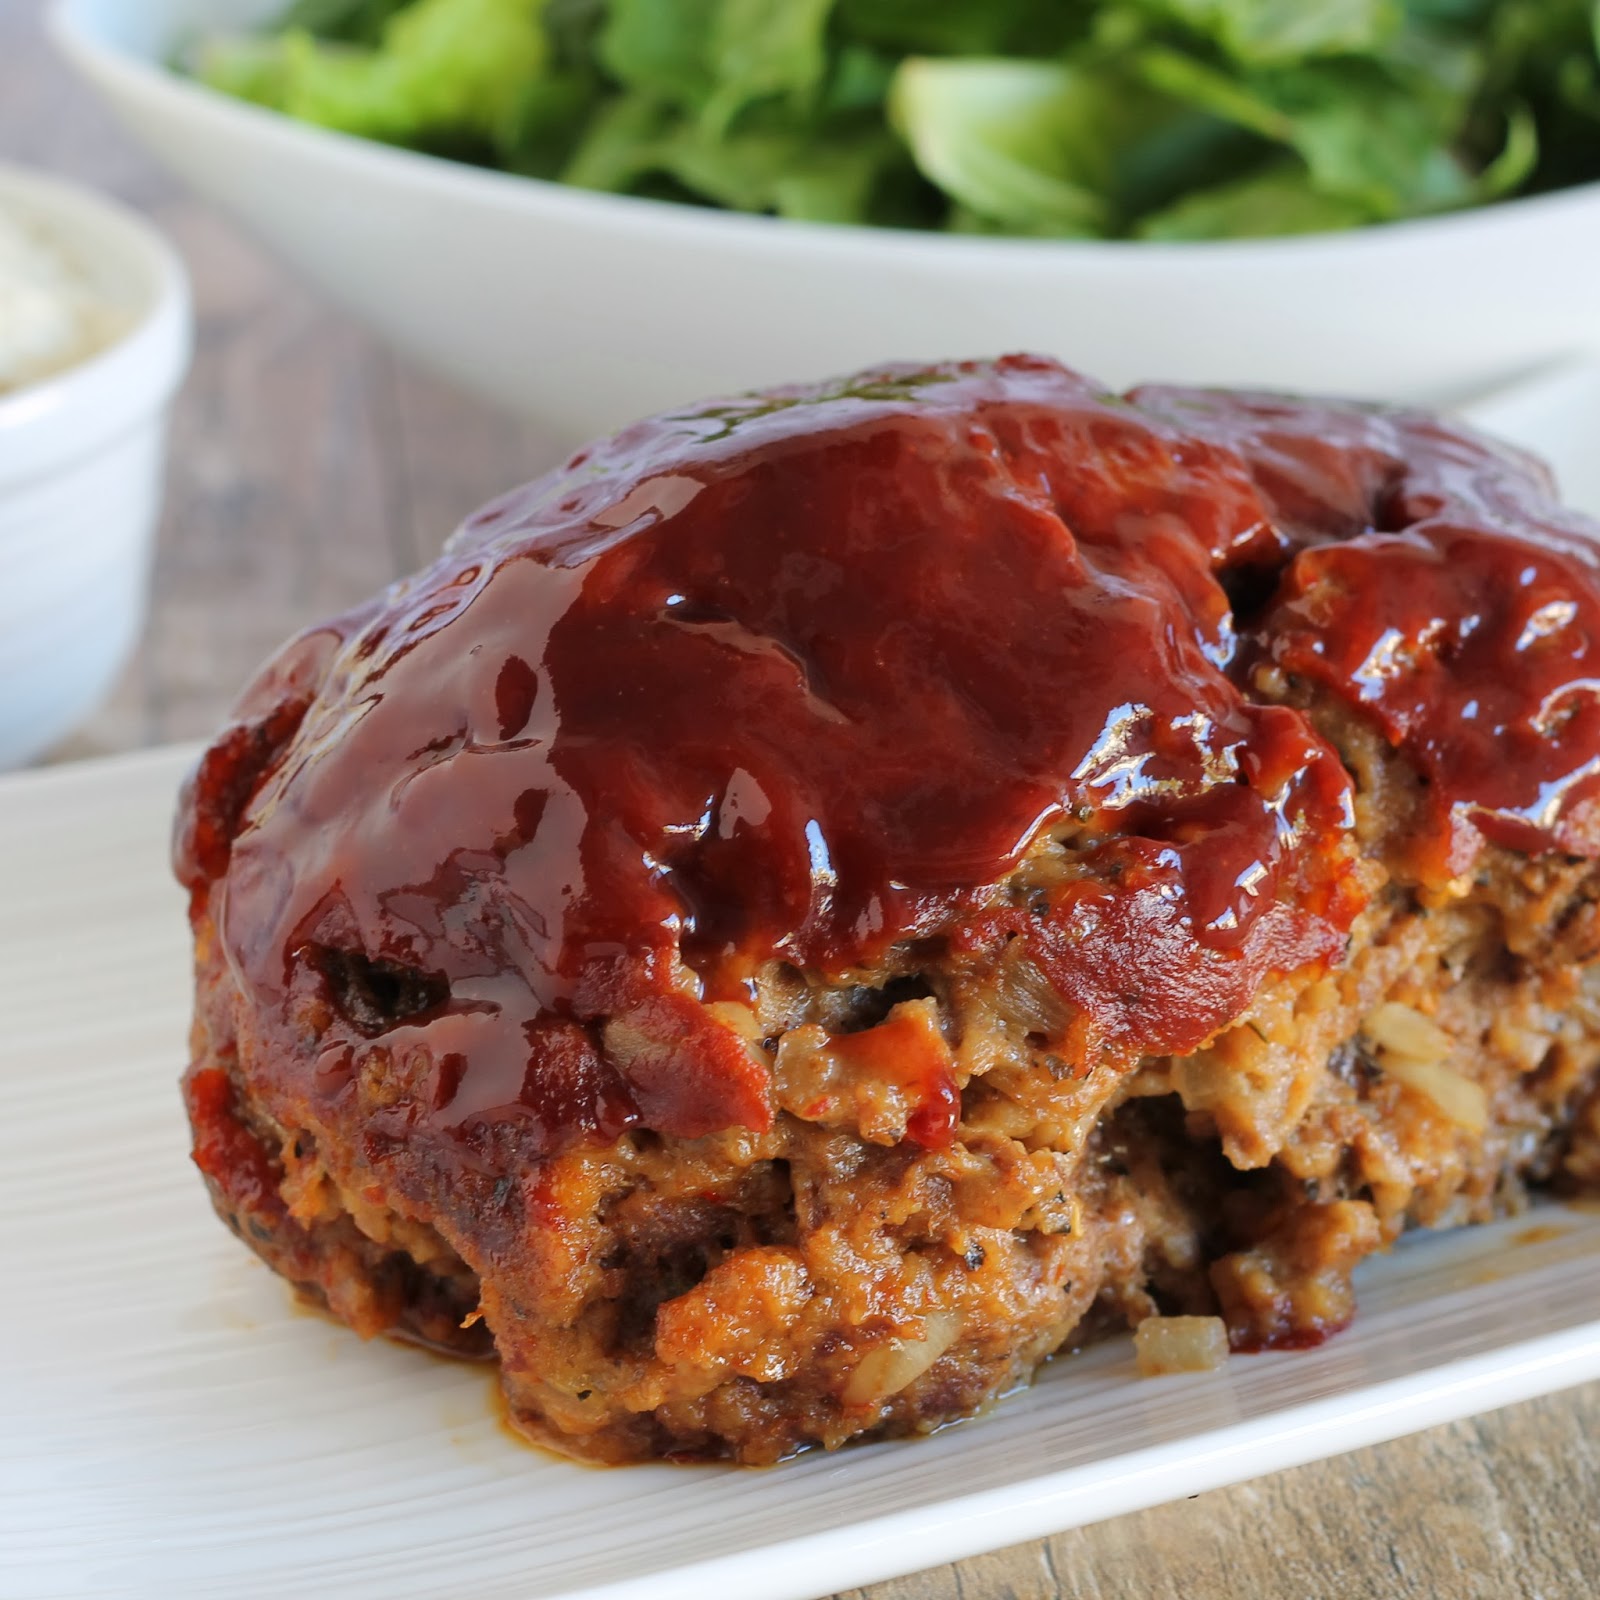 meatloaf with tomato sauce and bread crumbs